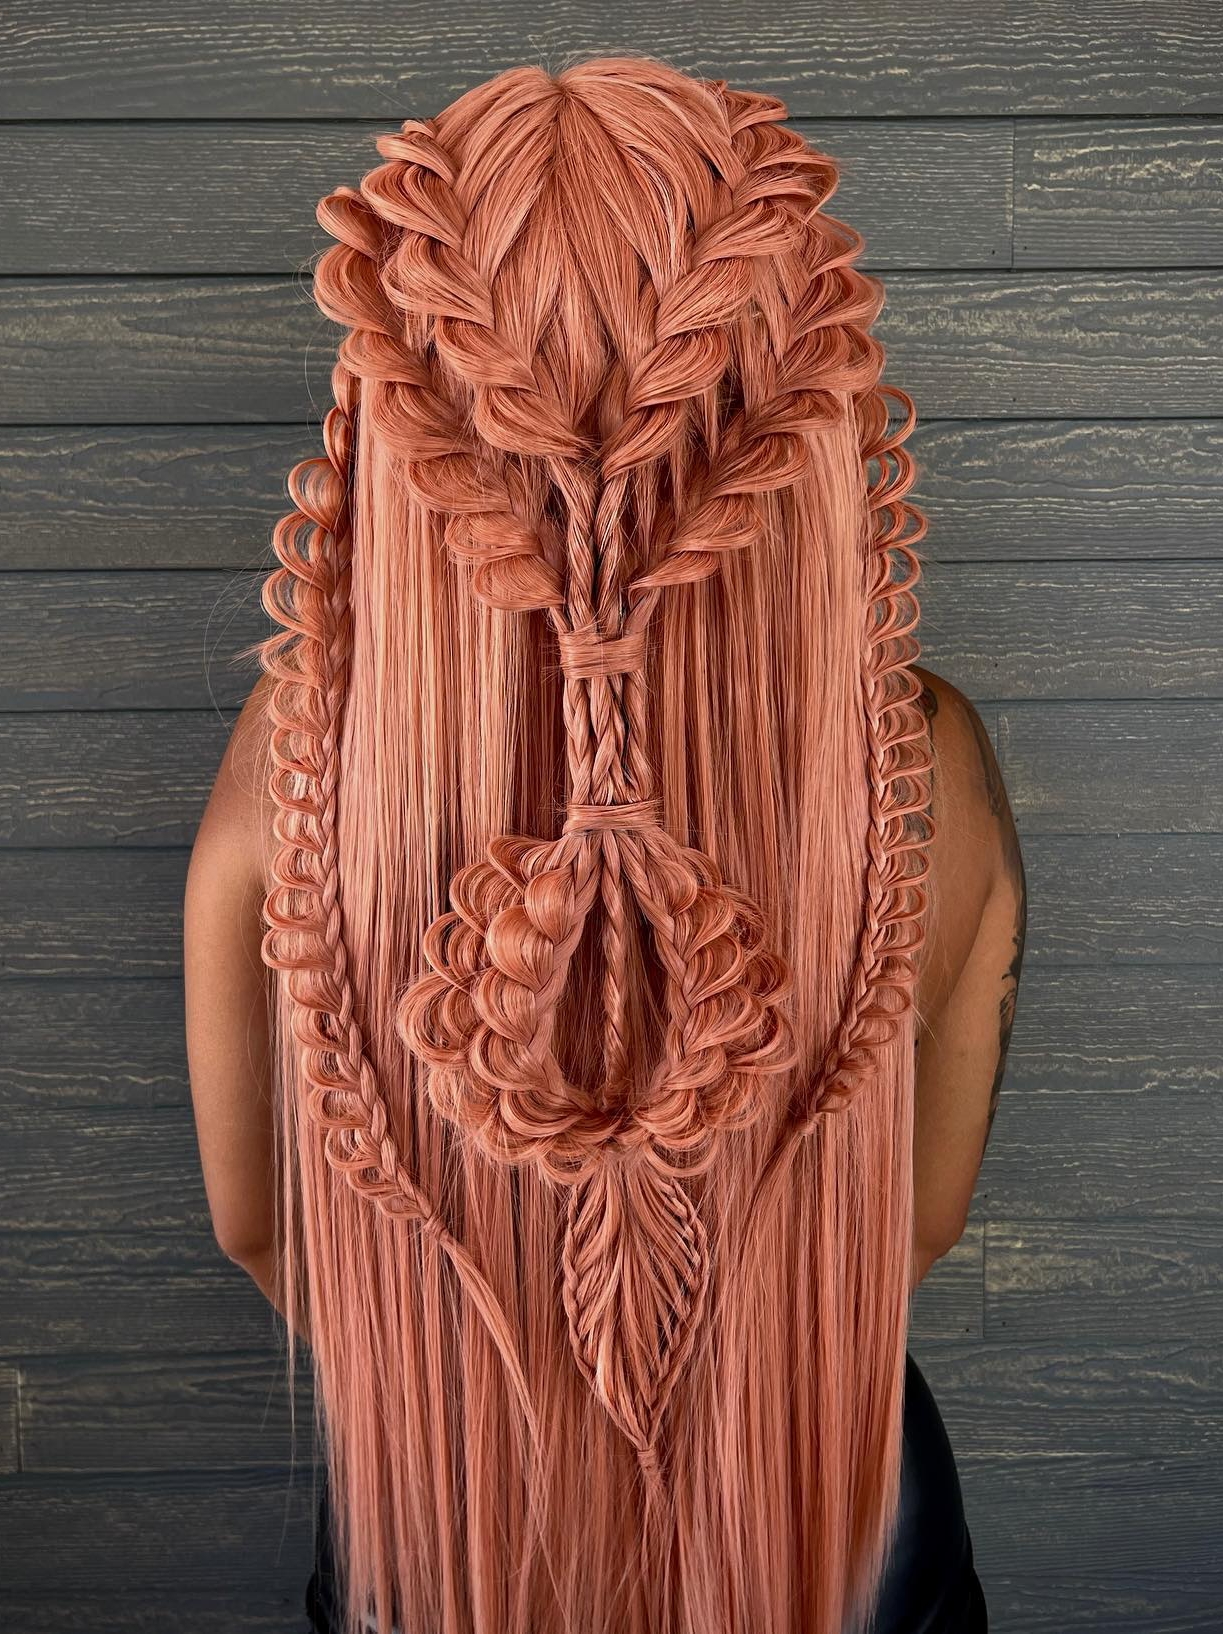 Braided Rose Gold Hairstyle on Long Straight Hair